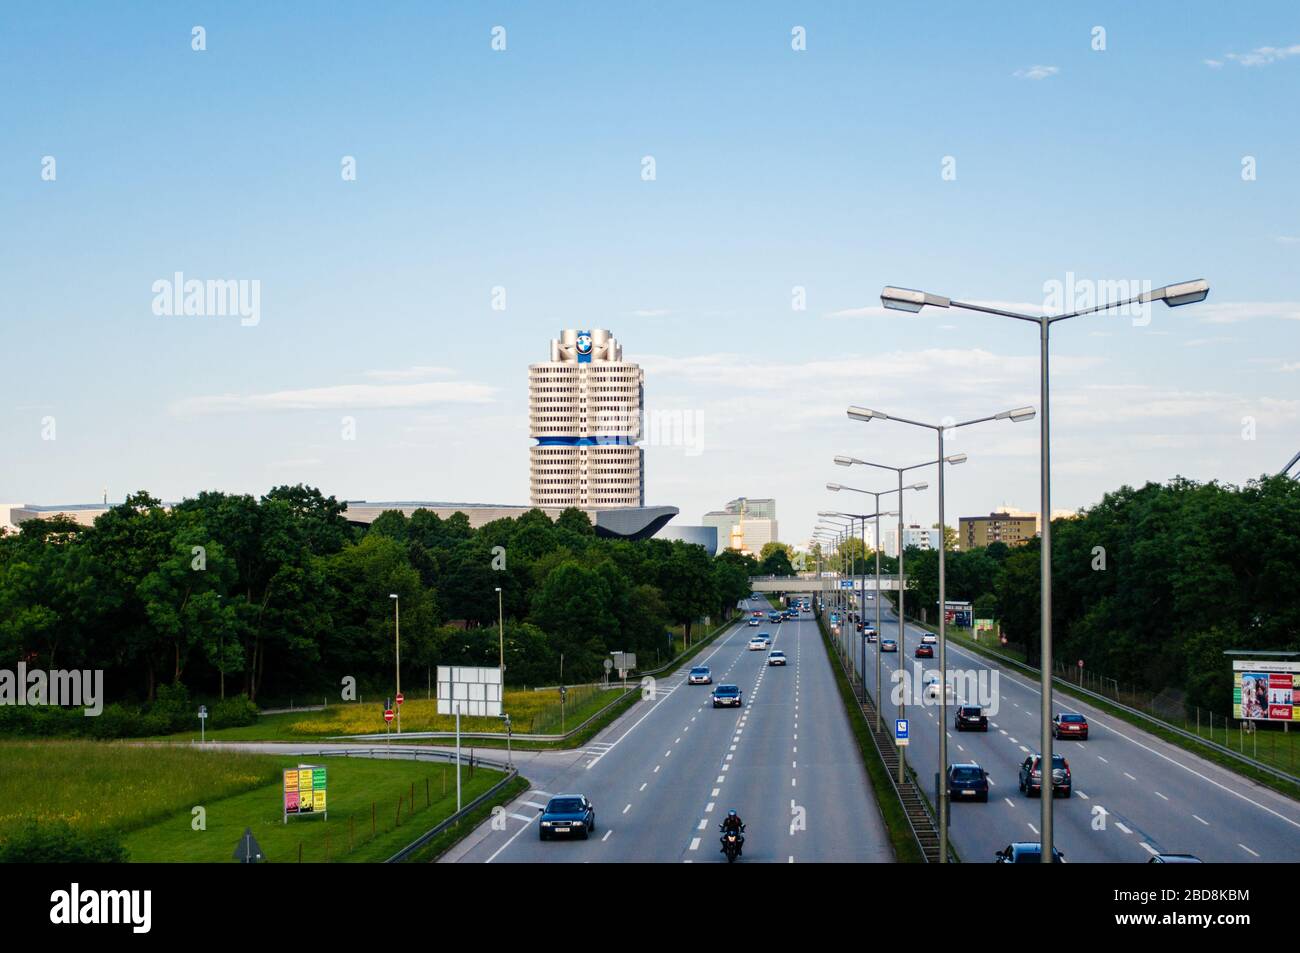 Munich, Germany - Jun 6, 2010: Aerial overhead view of BMW-Vierzylinder English: BMW four-cylinder HQ Tower serving as world headquarters for Bavarian automaker since 1973 - highway cars and cityscape Stock Photo